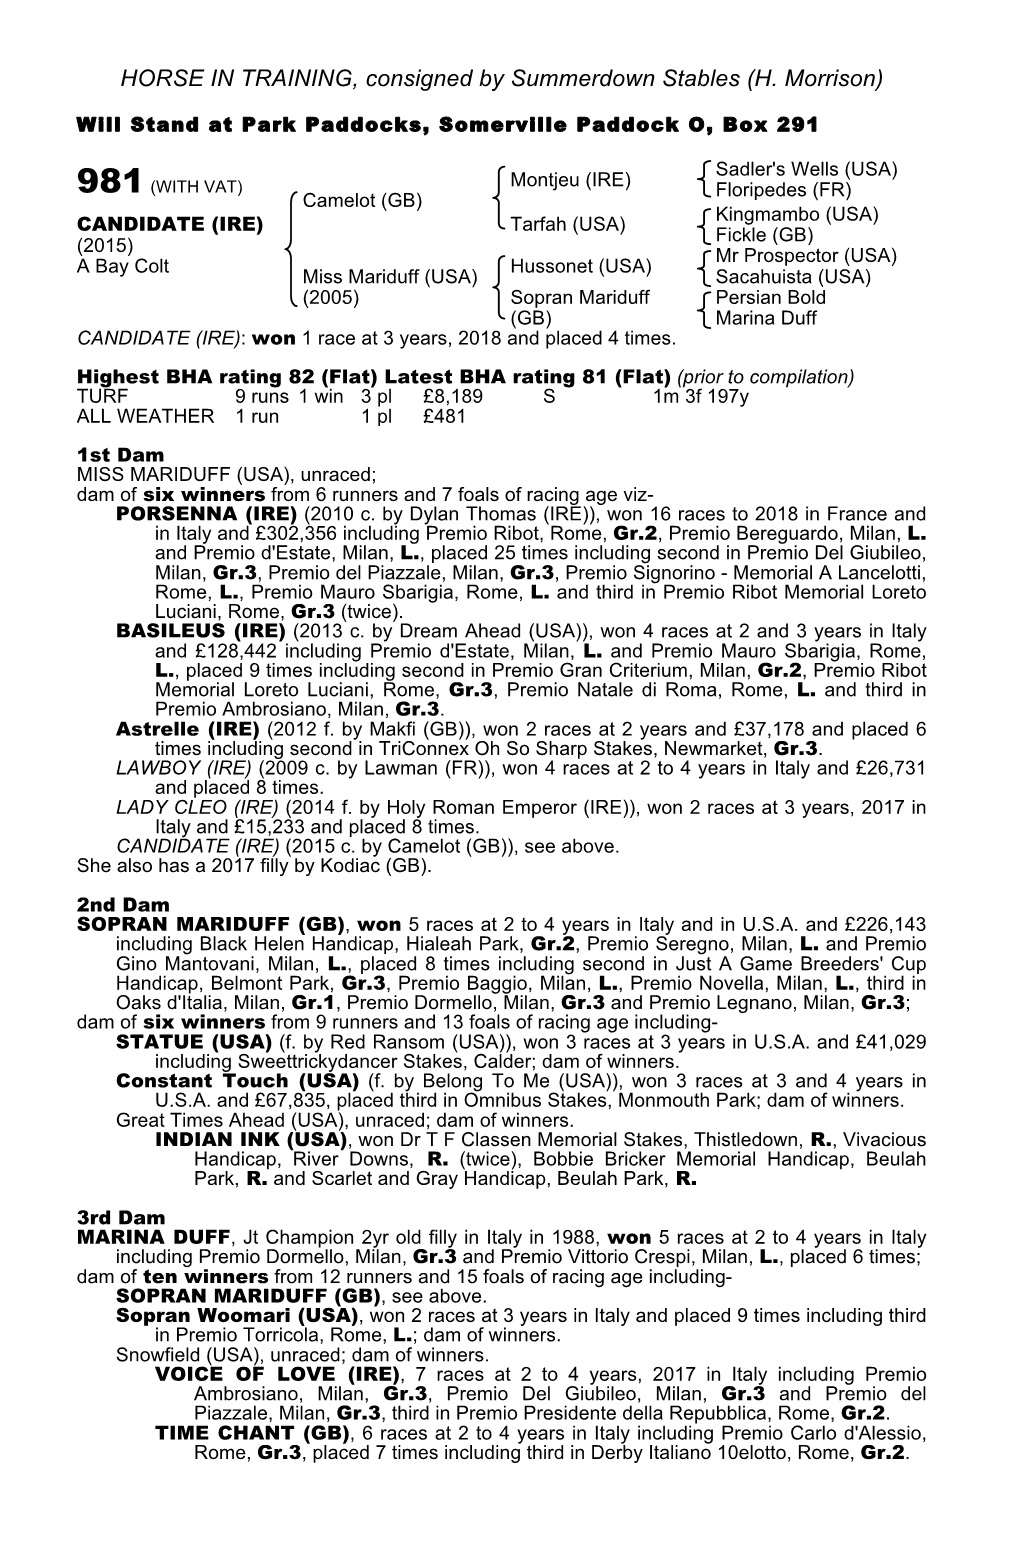 HORSE in TRAINING, Consigned by Summerdown Stables (H